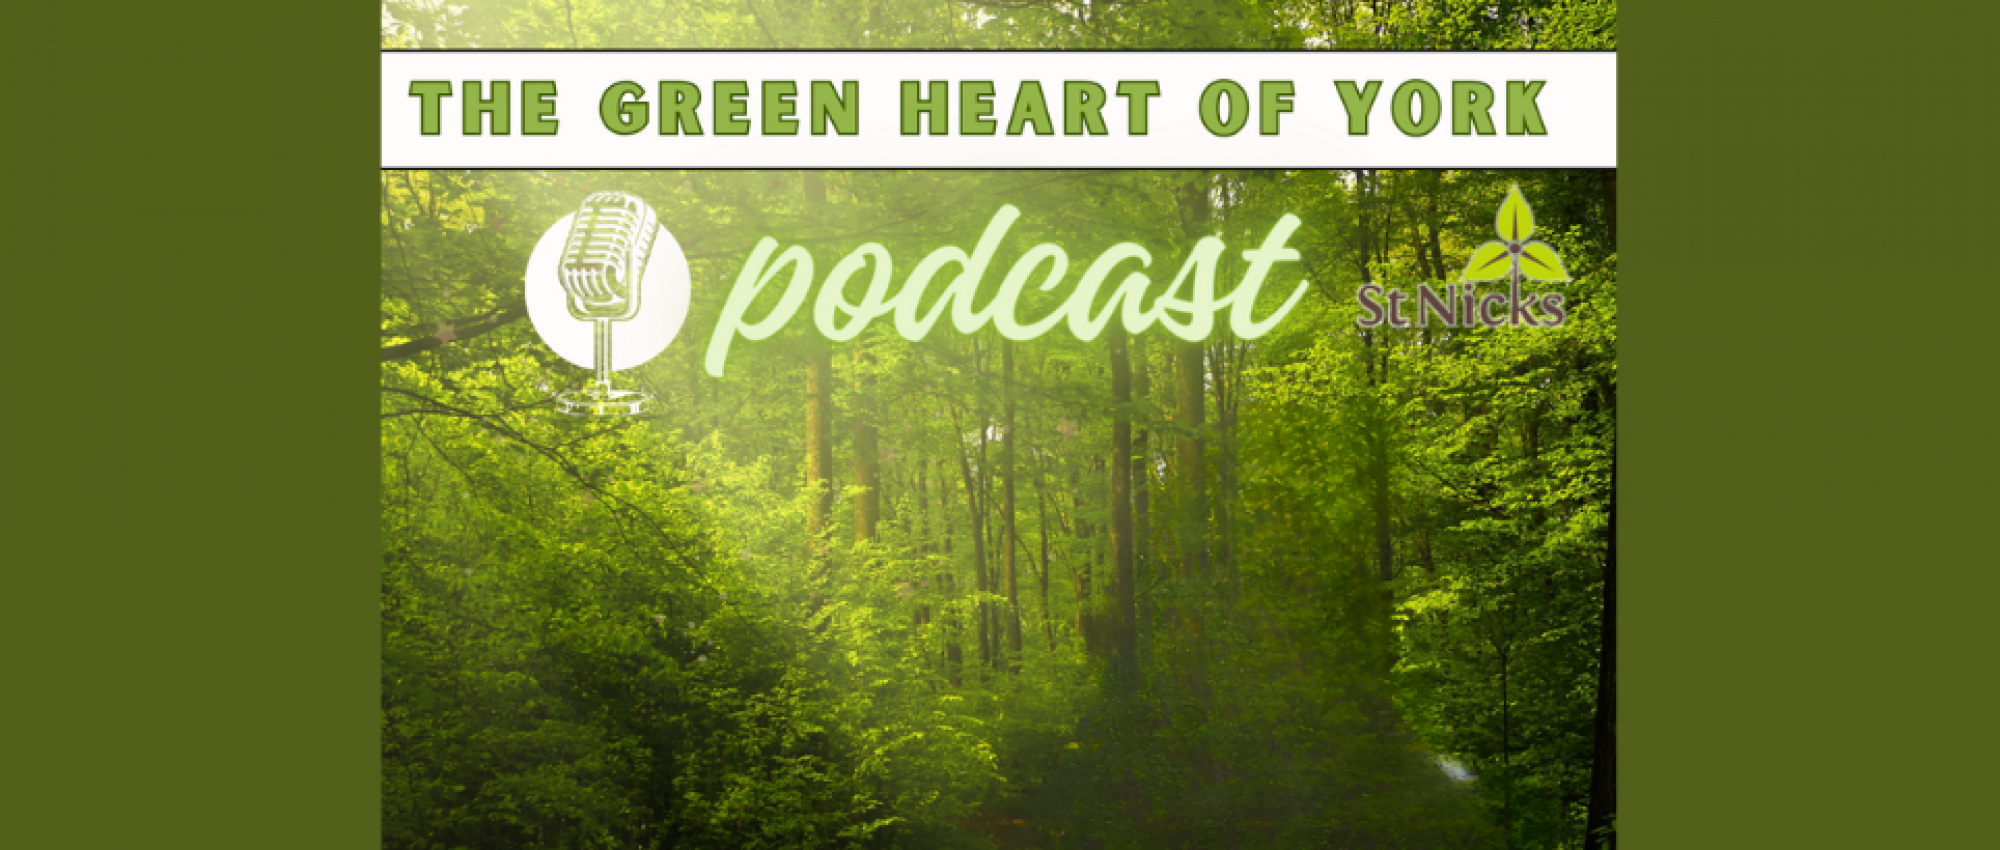 The green heart of york podcast title on  green forest background with a cartoon microphone and the st nicks logo with a white border to make it stand out